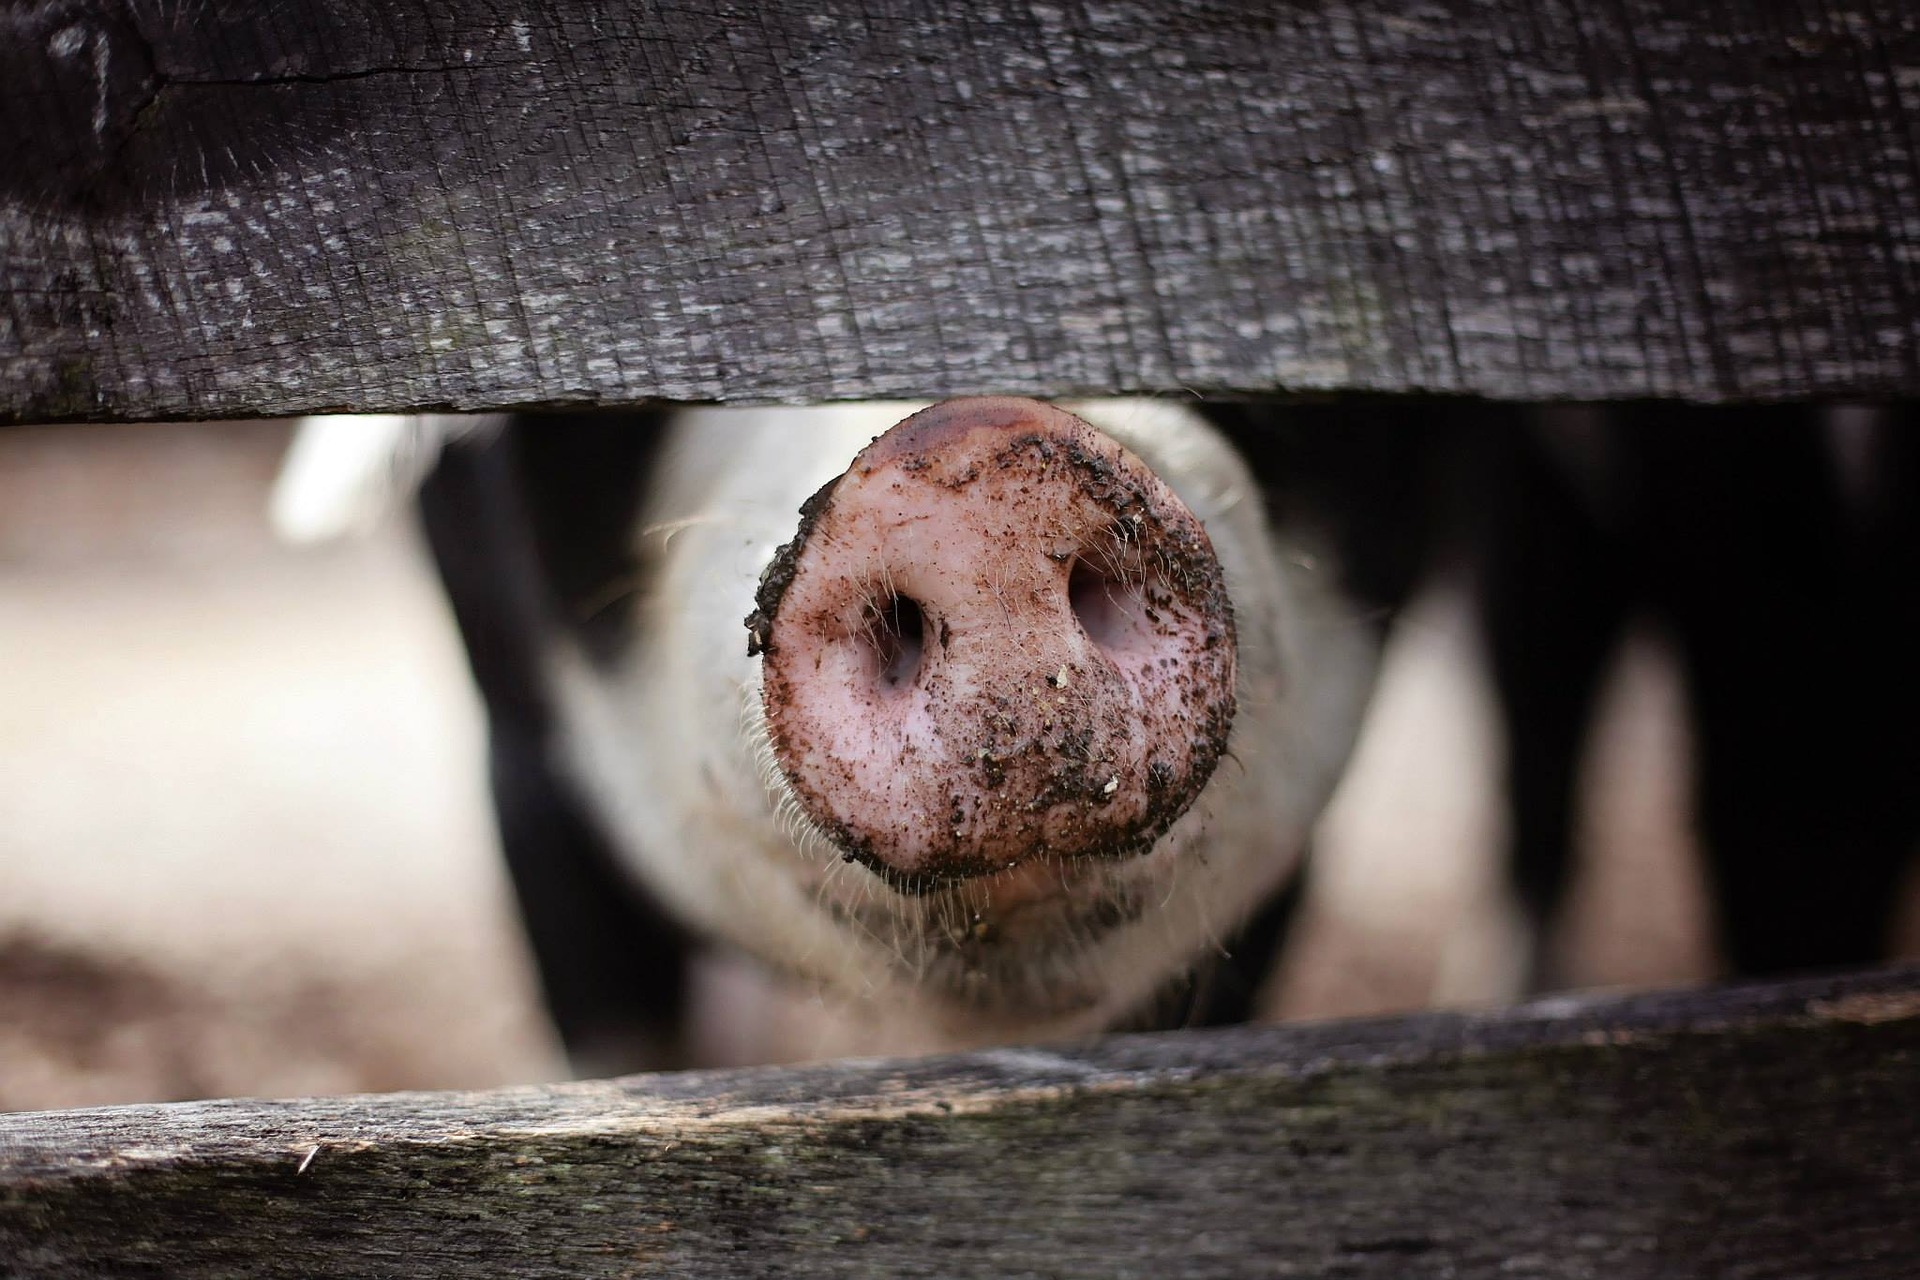 Cleaner pig poop could reduce bacon’s environmental burden